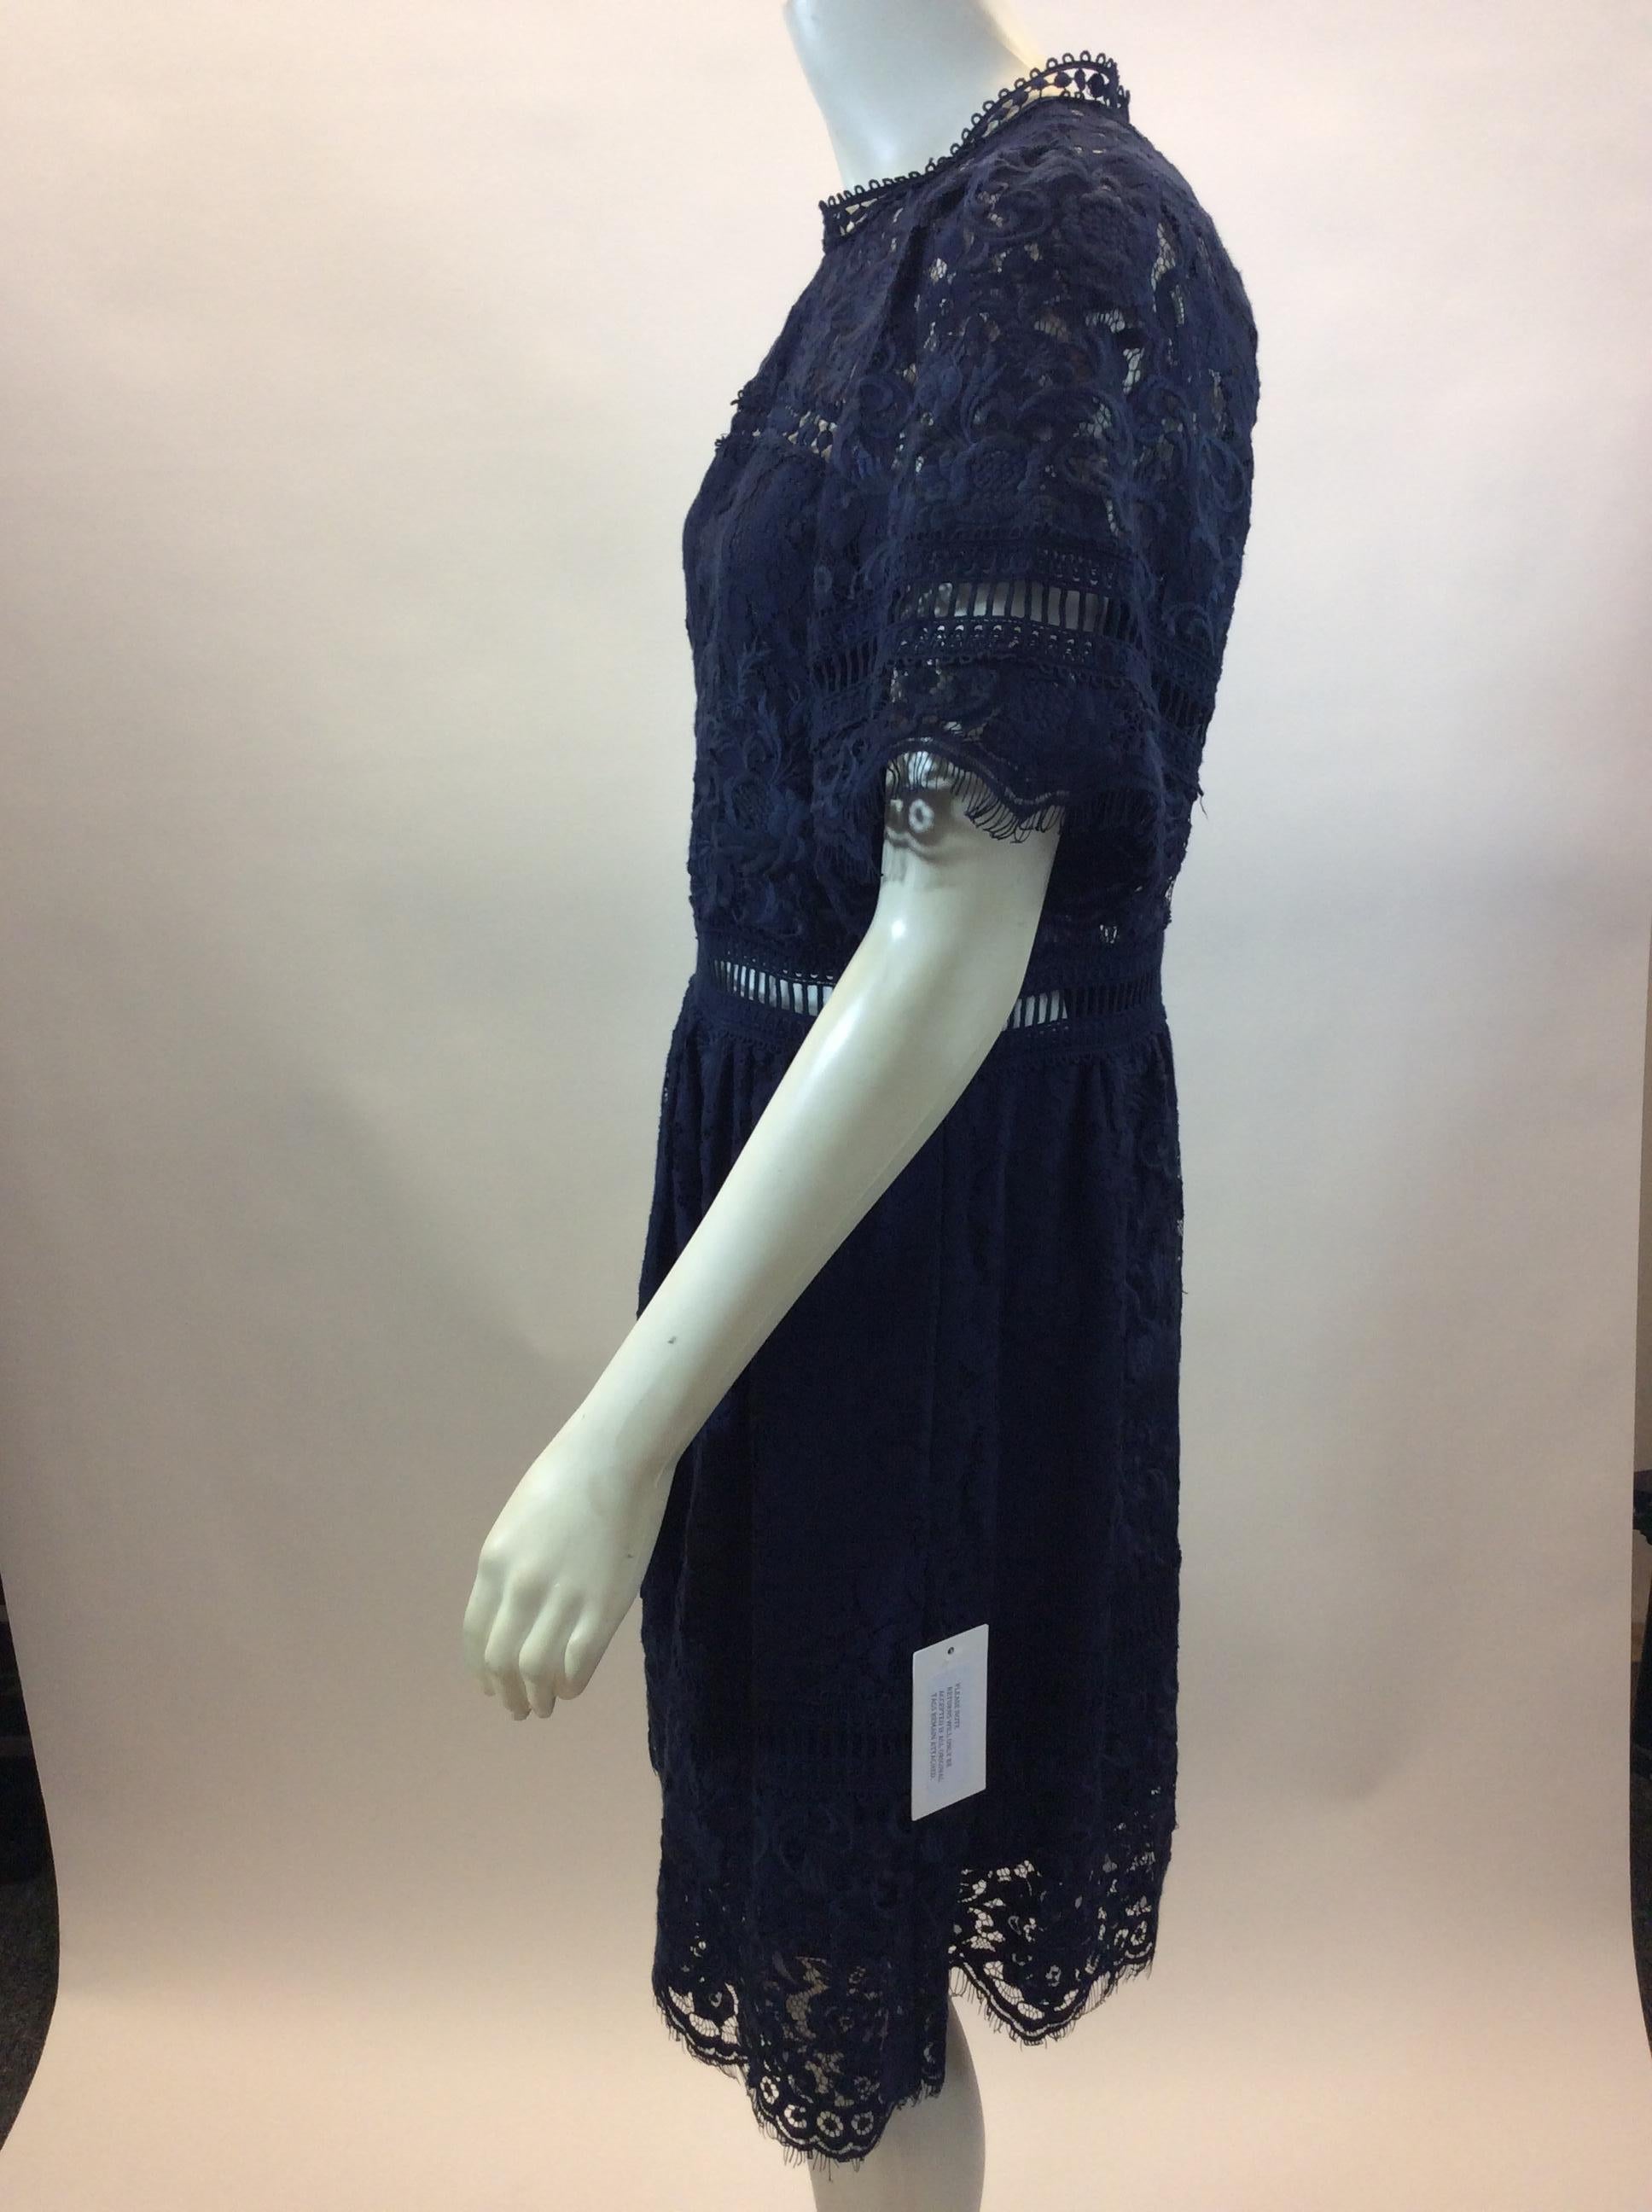 Sea Navy Blue Lace Cut Out Dress NWT
$178
Made in China
55% Cotton, 45% Nylon
Size 6
Length 37